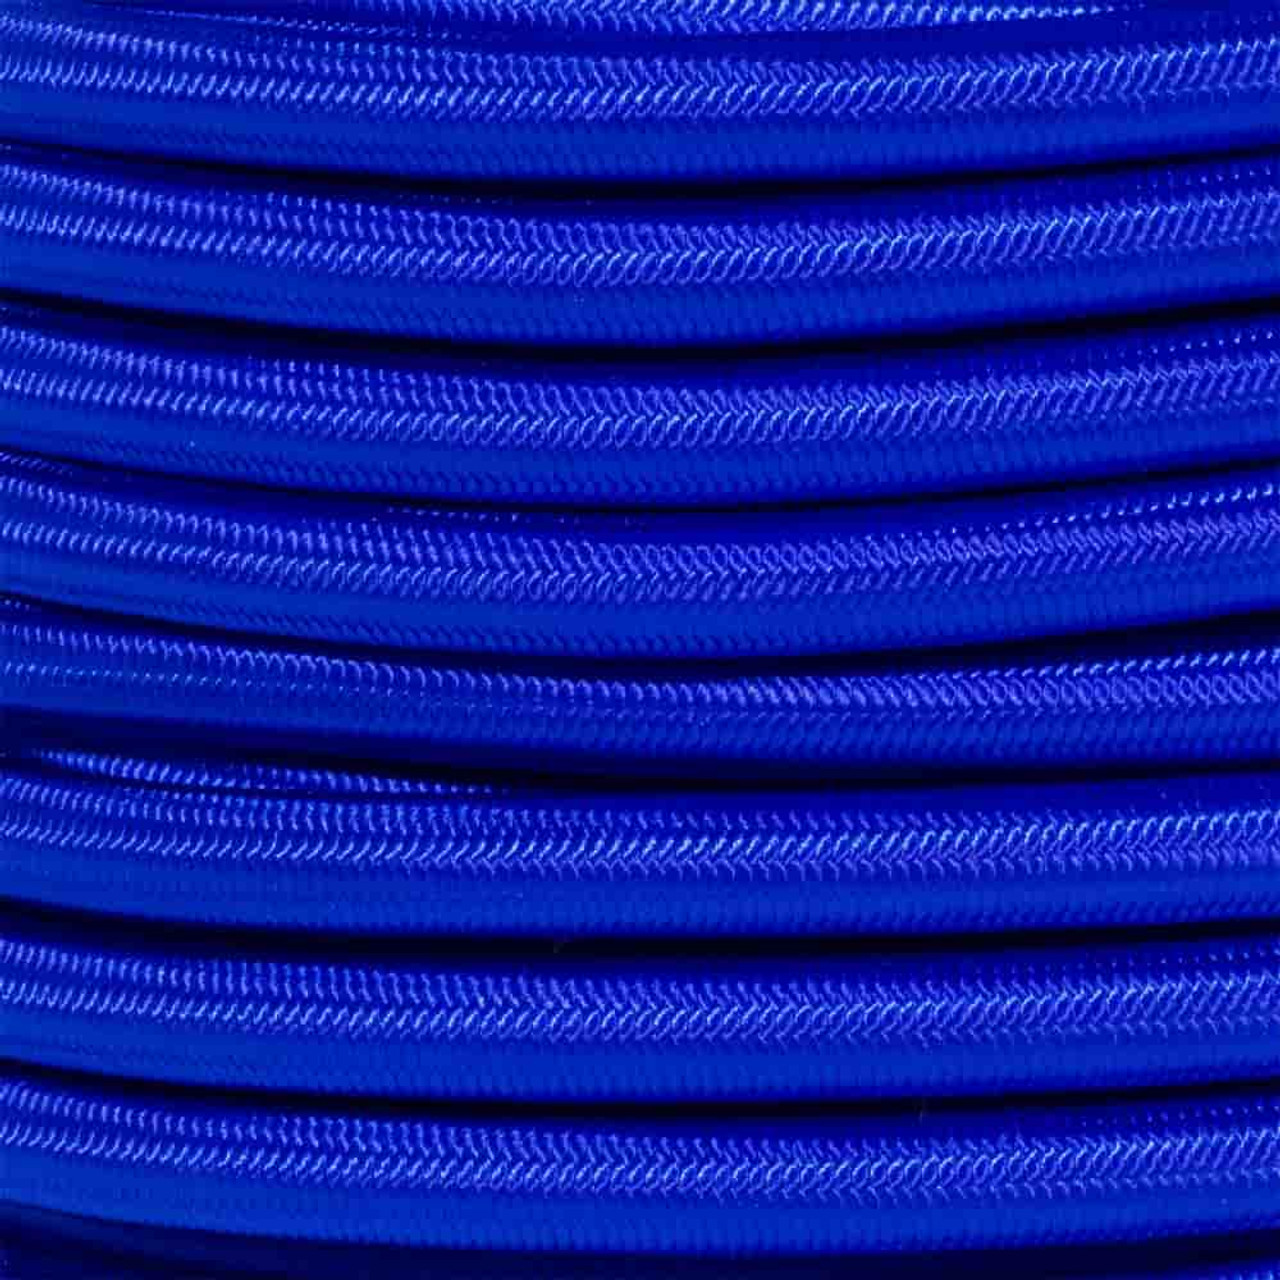 Electric Blue 1/8 Shock Cord - Bored Paracord Marine Grade Shock / Bungee  / Stretch Cord 1/8 inch x 100 feet Several Colors - Made in USA